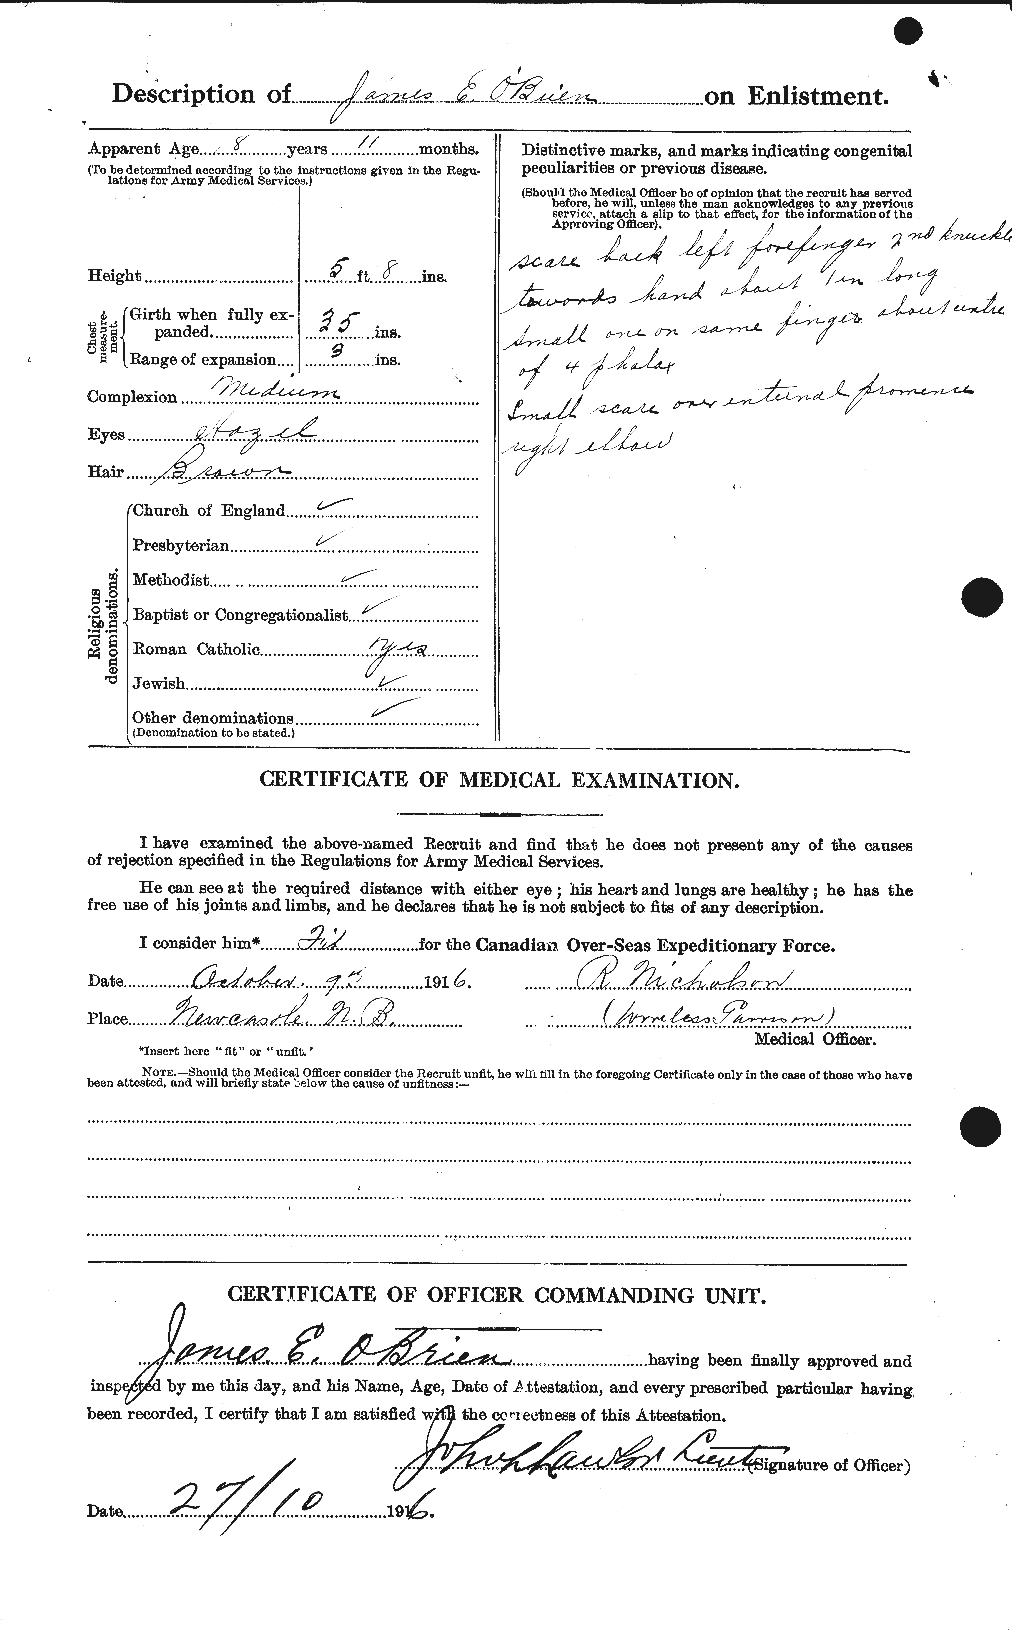 Personnel Records of the First World War - CEF 554094b